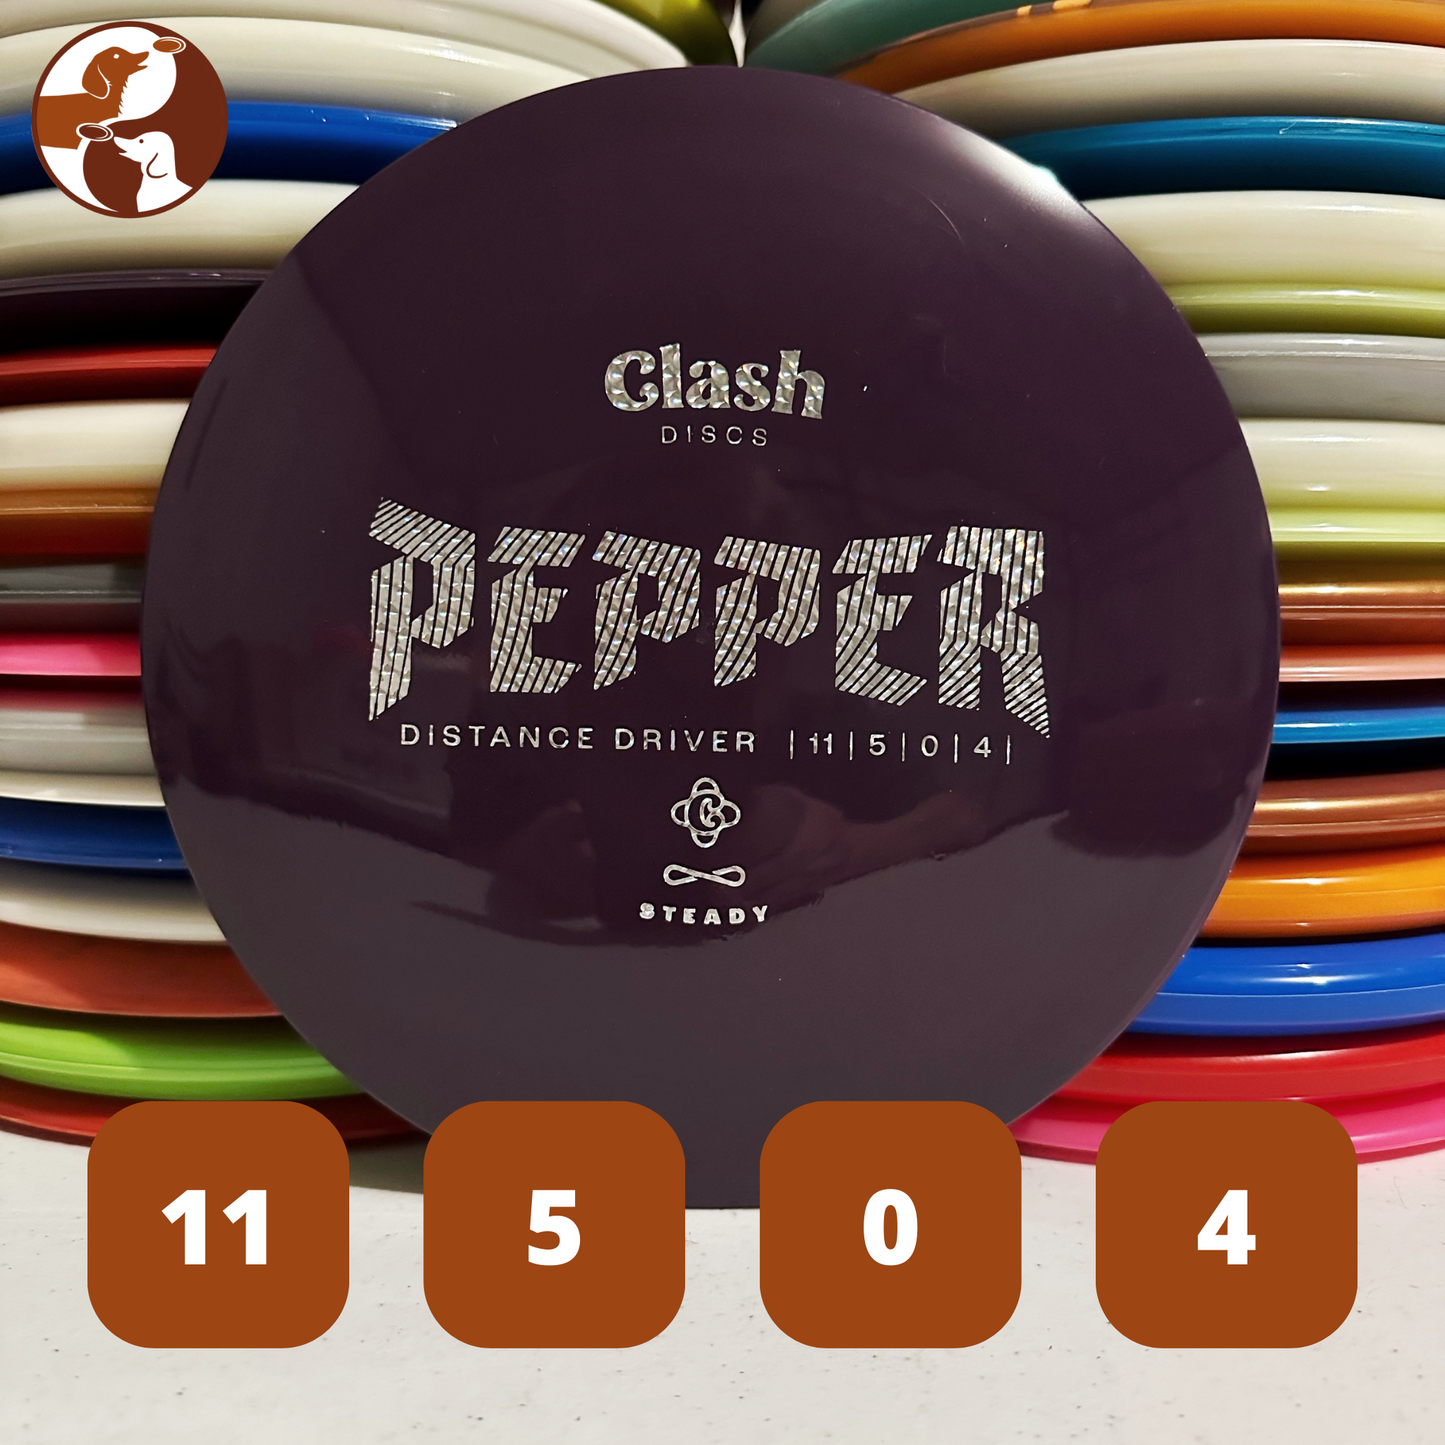 Clash Discs Steady Pepper with Flight Numbers